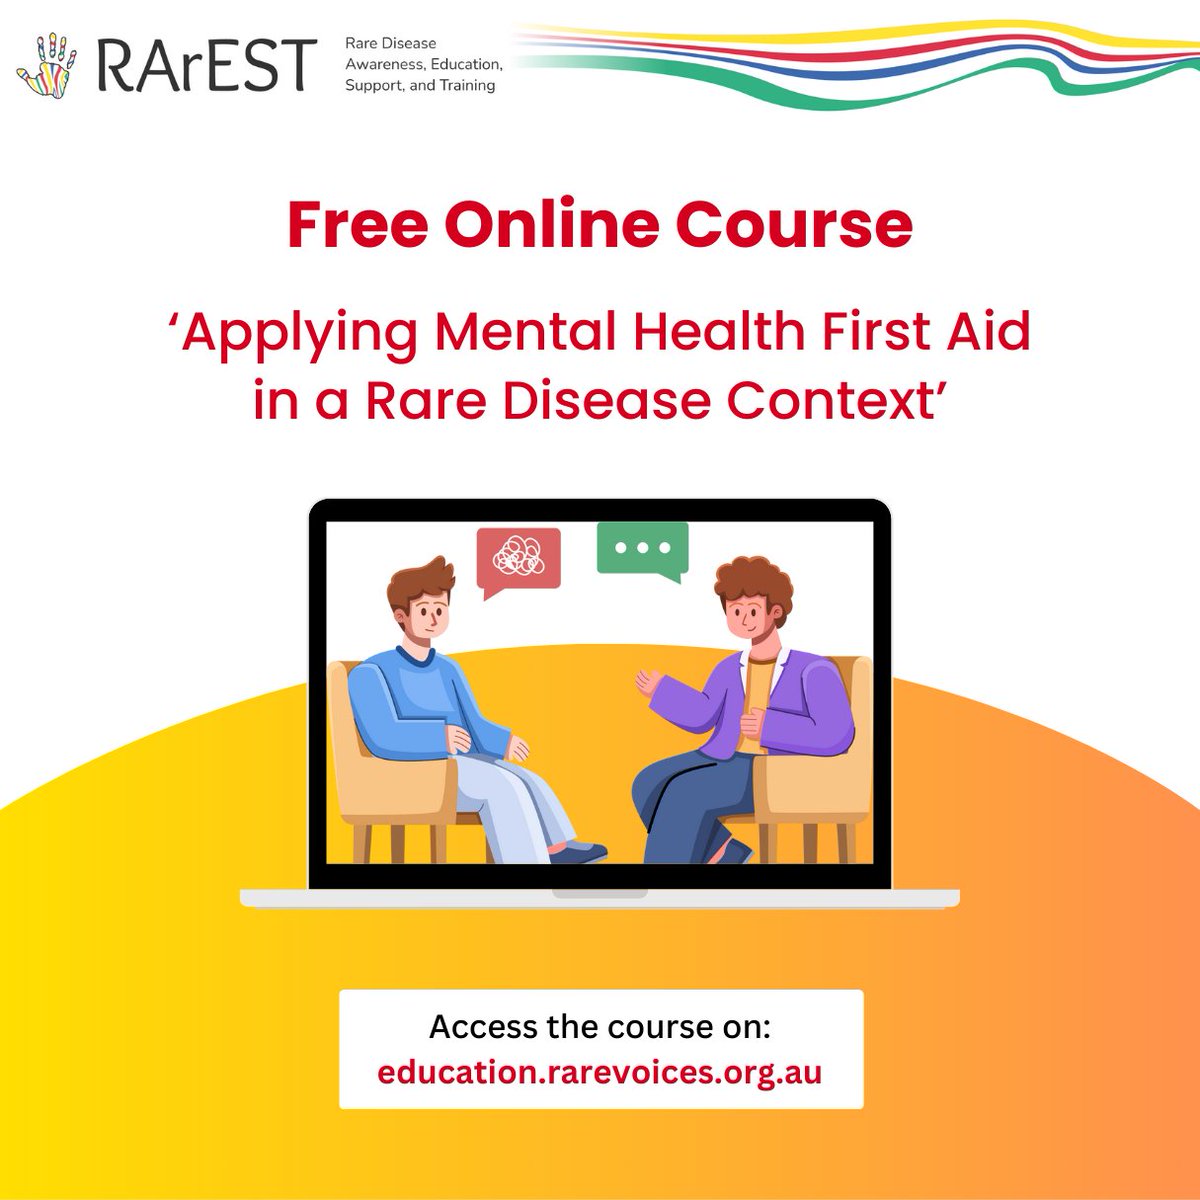 This resource assists those working with the rare disease community with providing Mental Health First Aid (MHFA). Developed in consultation with people living with a rare disease, this course complements MHFA training. Access the course: education.rarevoices.org.au